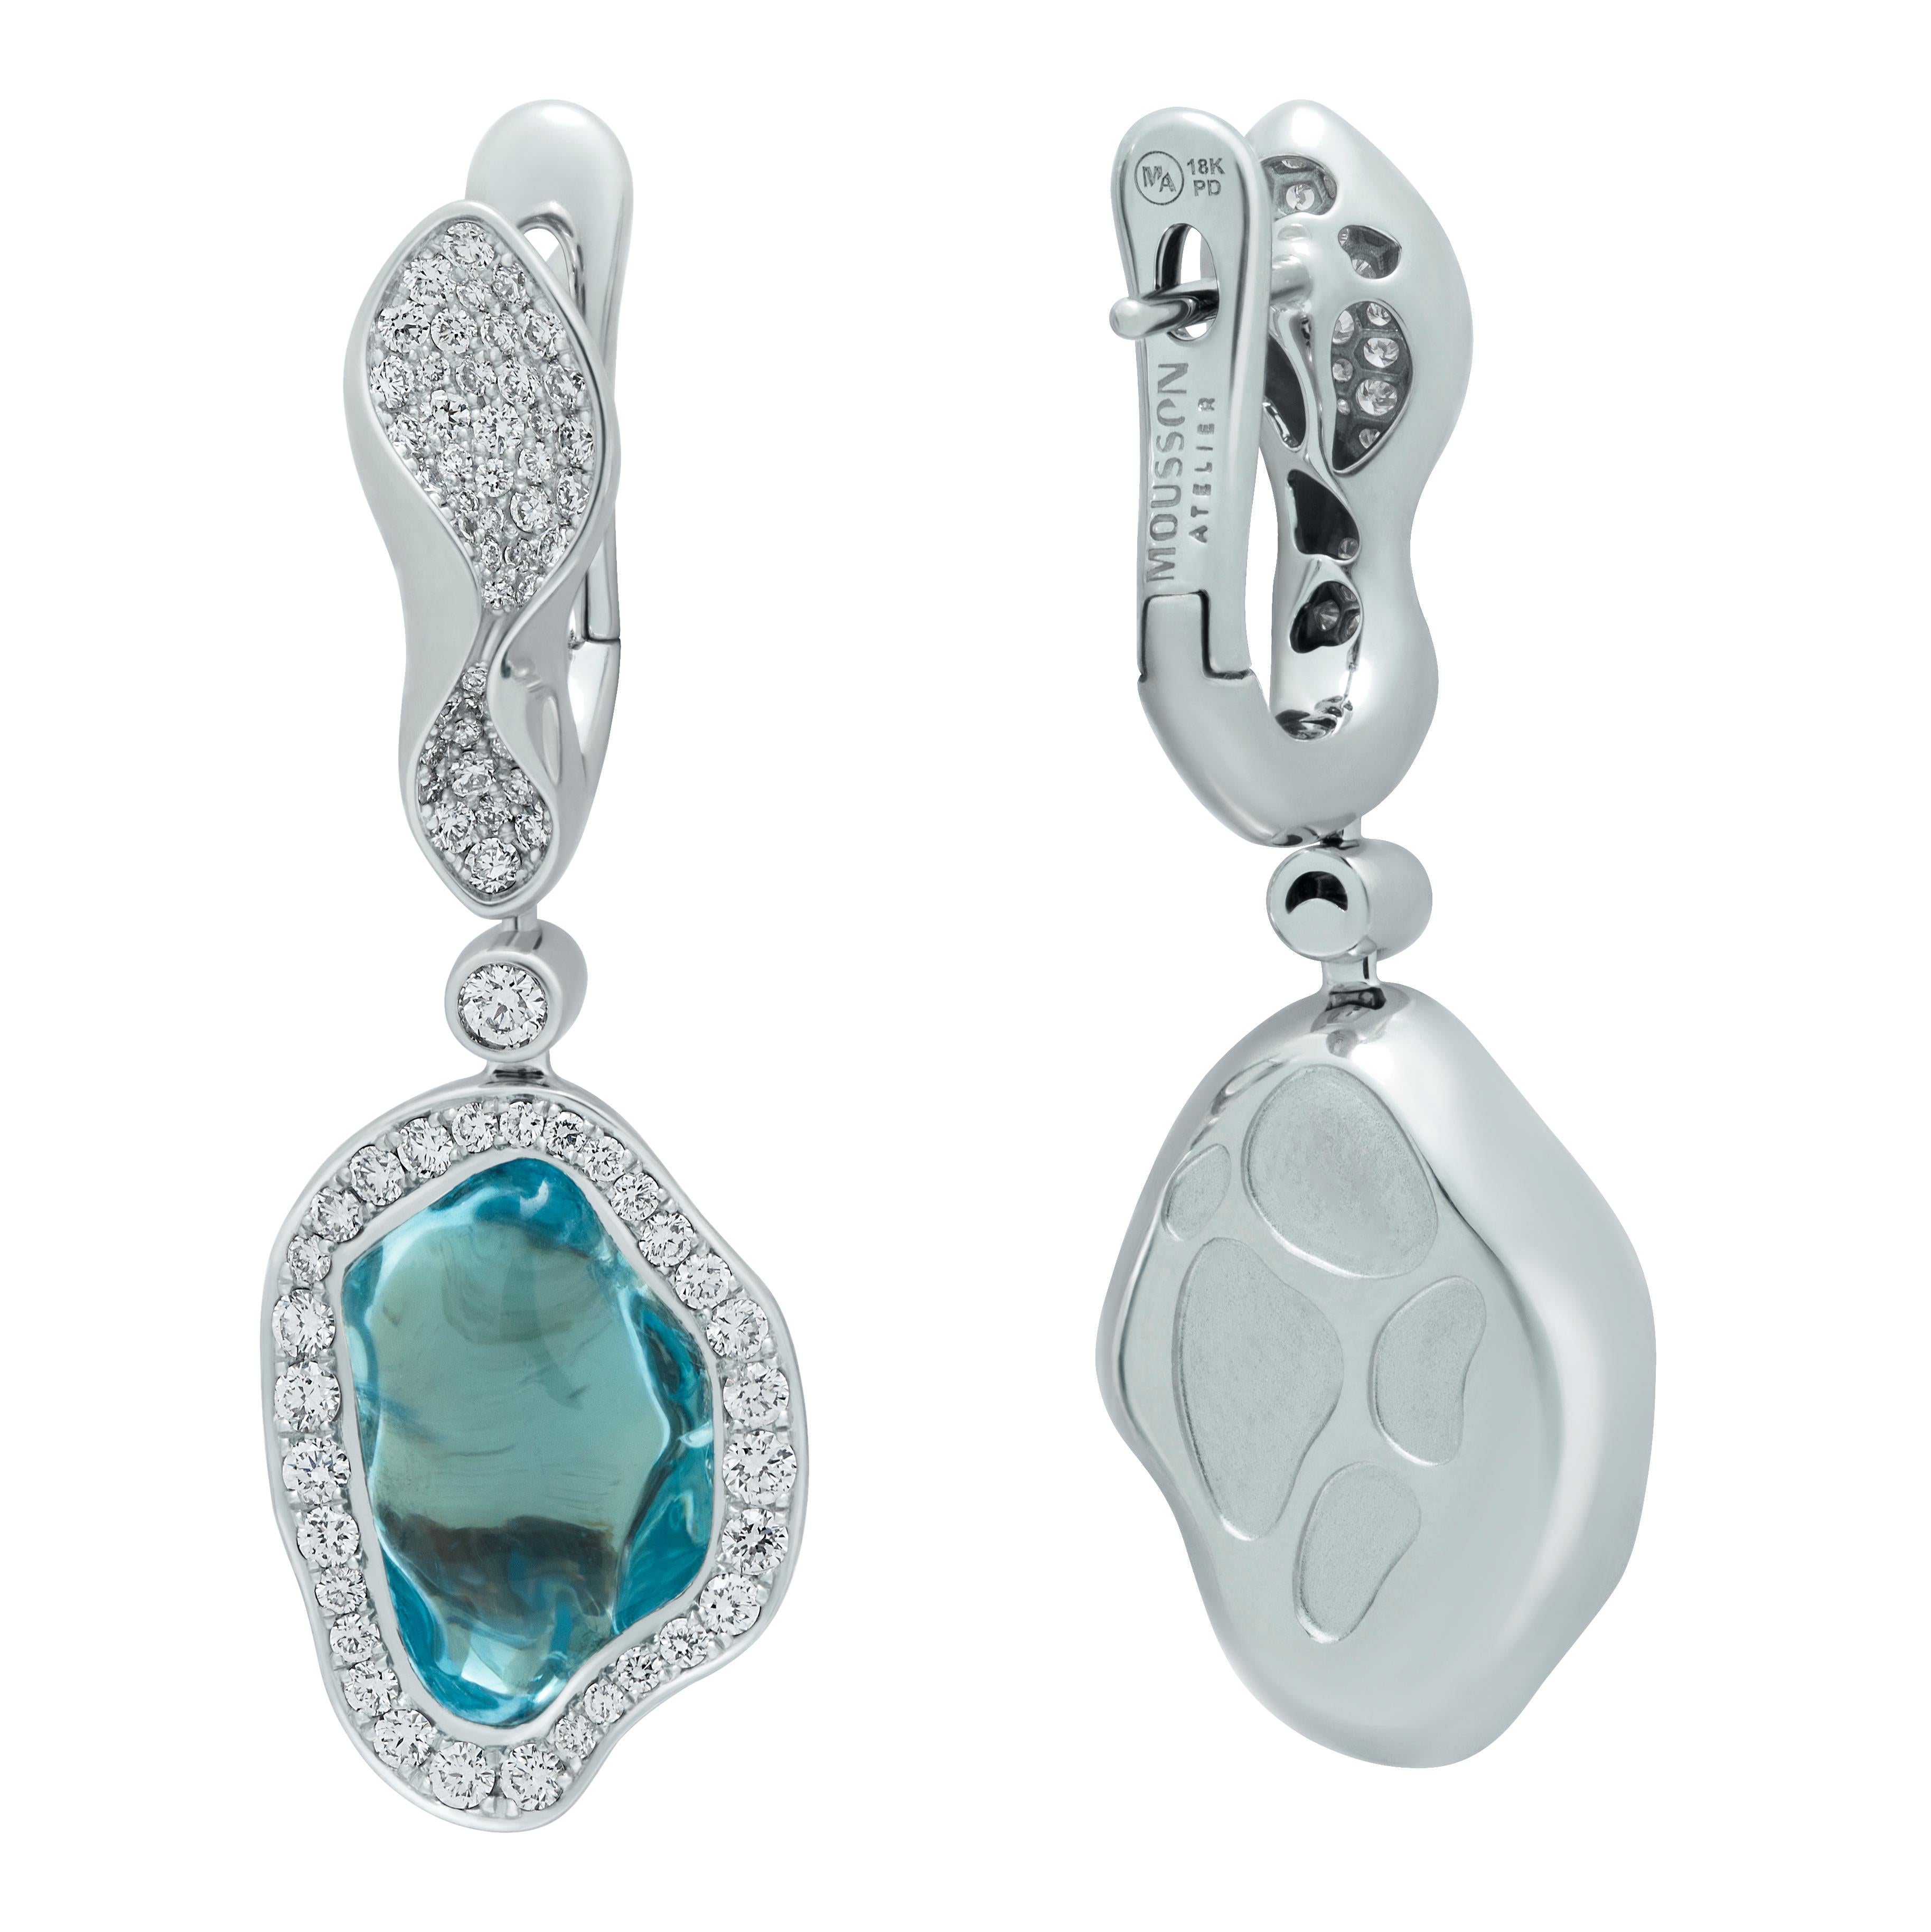 Aquamarine Baroque 10.75 Carat Diamonds 18 Karat White Gold Spectrum Earrings

Gorgeous and unique, this 18K White Gold, Aquamarines, Diamonds Earrings from the Spectrum collection is a show-stopper. Spectacular baroque-shaped Aquamarines framed